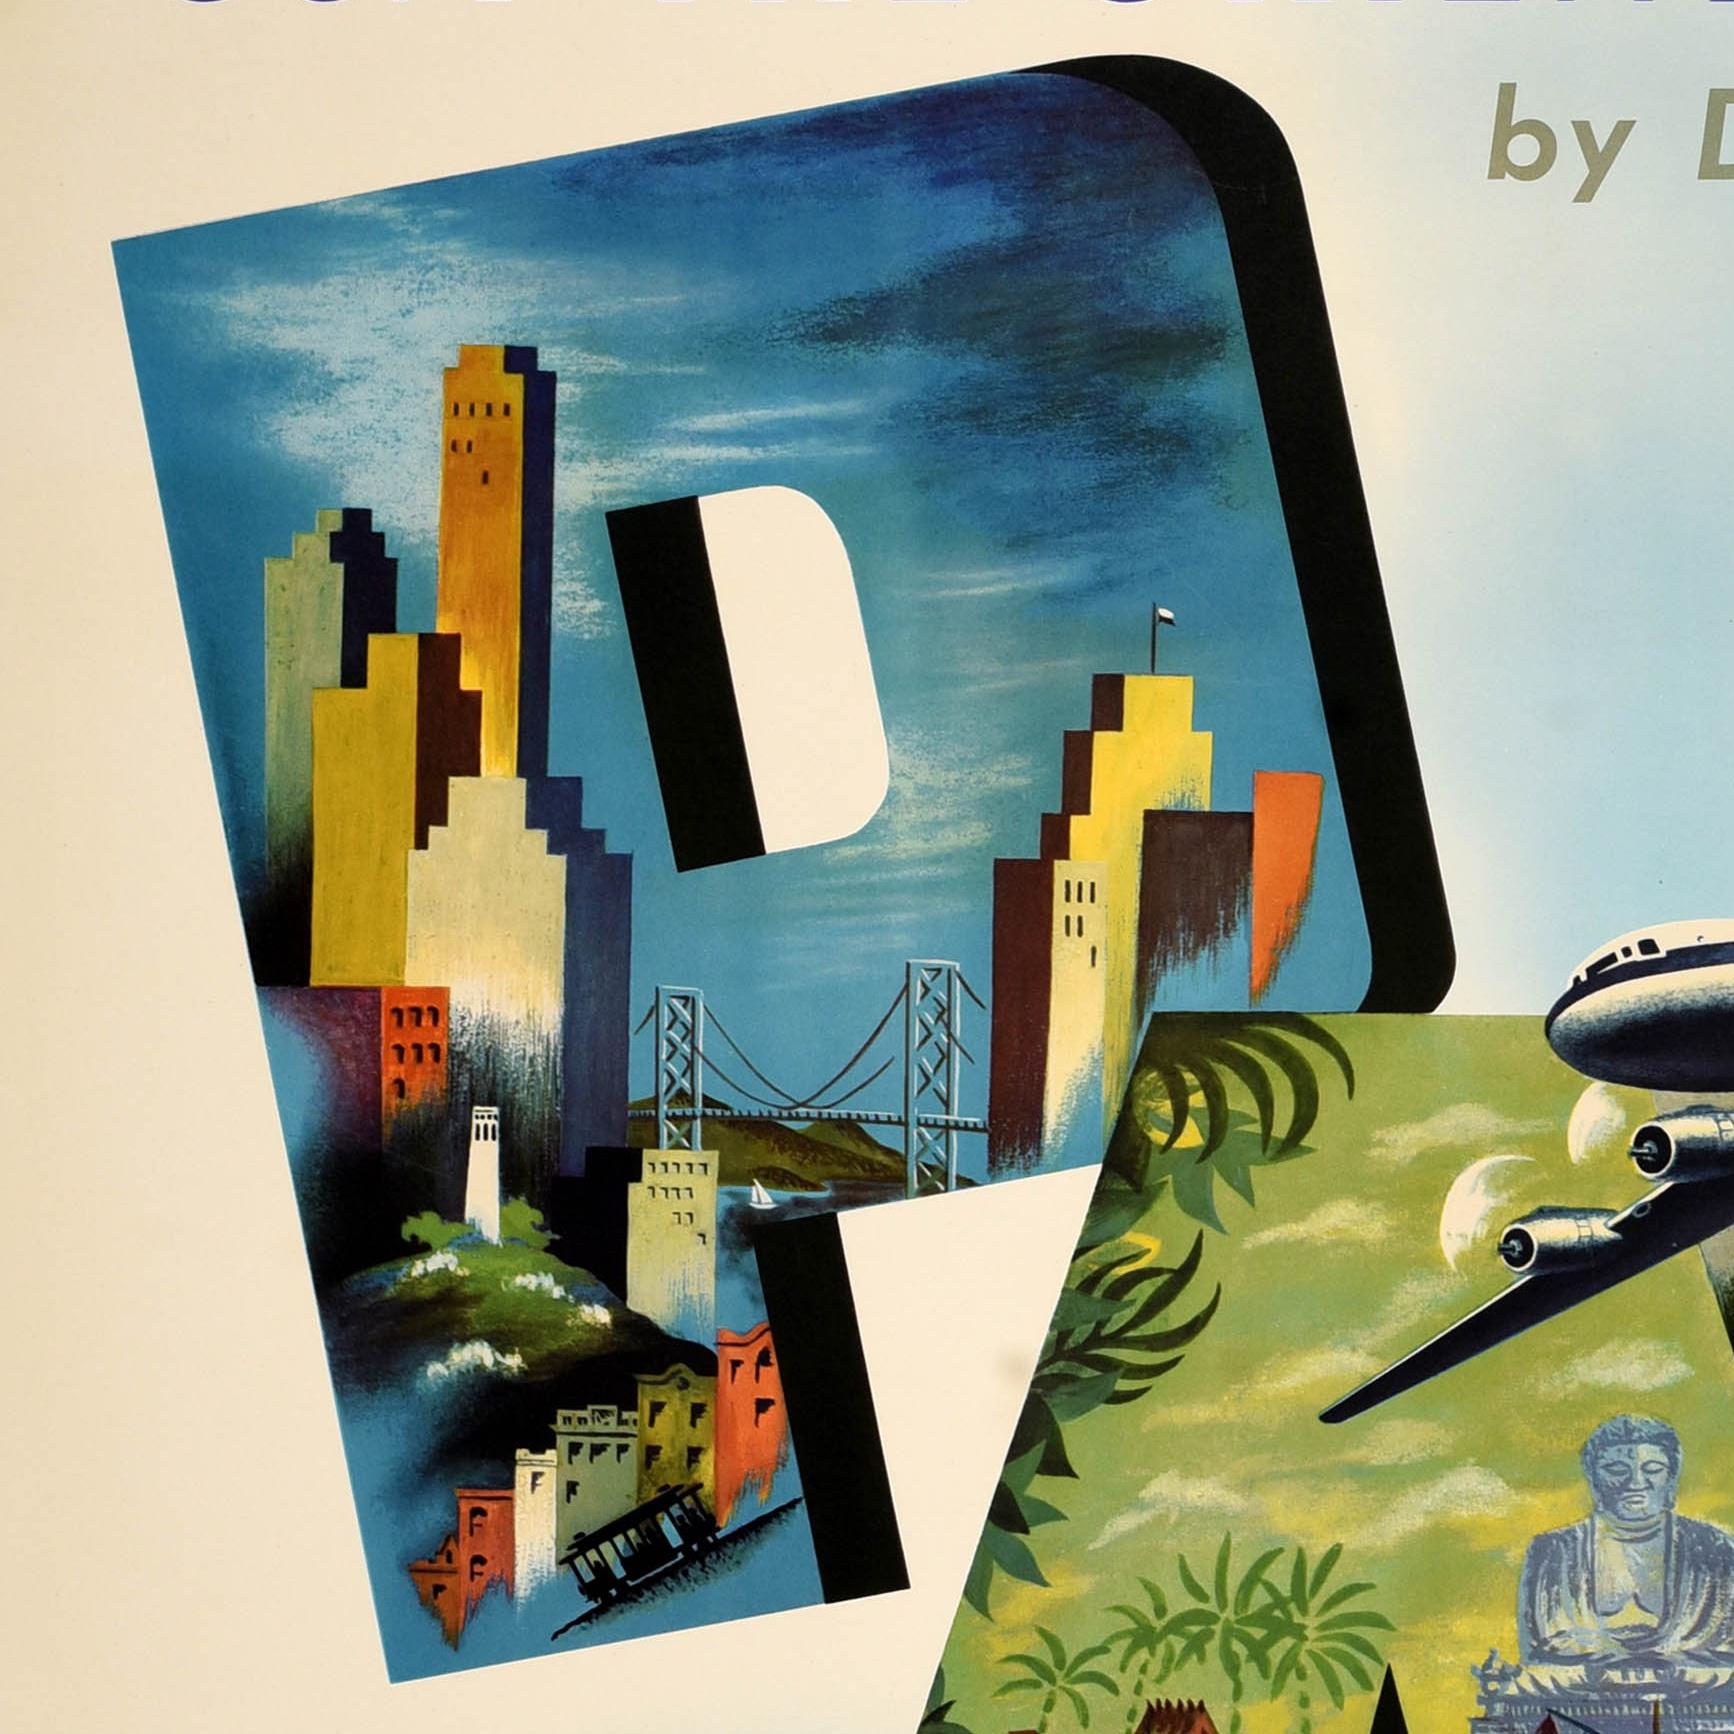 Original vintage travel poster - USA The Orient Europe by DC-6 sleeper PAL Philippine Airlines Speed Comfort Dependability - featuring a great design depicting a passenger plane flying over the bold initials depicting scenes representing the listed